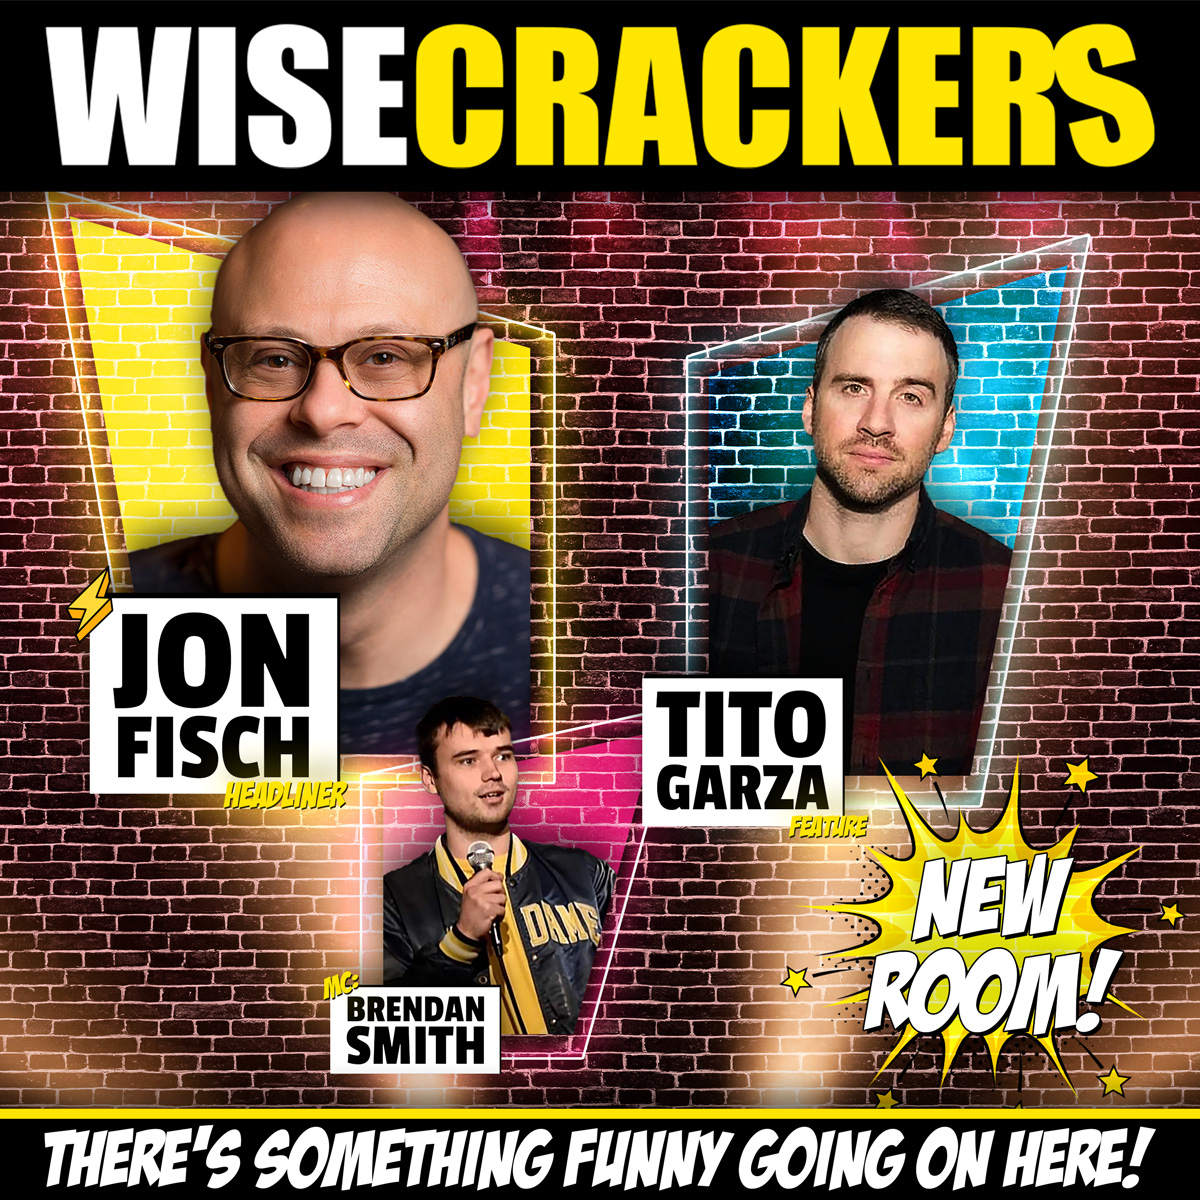 😆Come out and Laugh! We're bringing an over the top hilarious show in our new room upstairs in @MoheganPA this wkend with comedians Jon Fisch, Tito Garza, and Brendan Smith! Get tix now! Doors 8 Show 9 @JonnyFisch @titogarzacomedy @blacksab67 Tix: $25ea bit.ly/3DcCARa